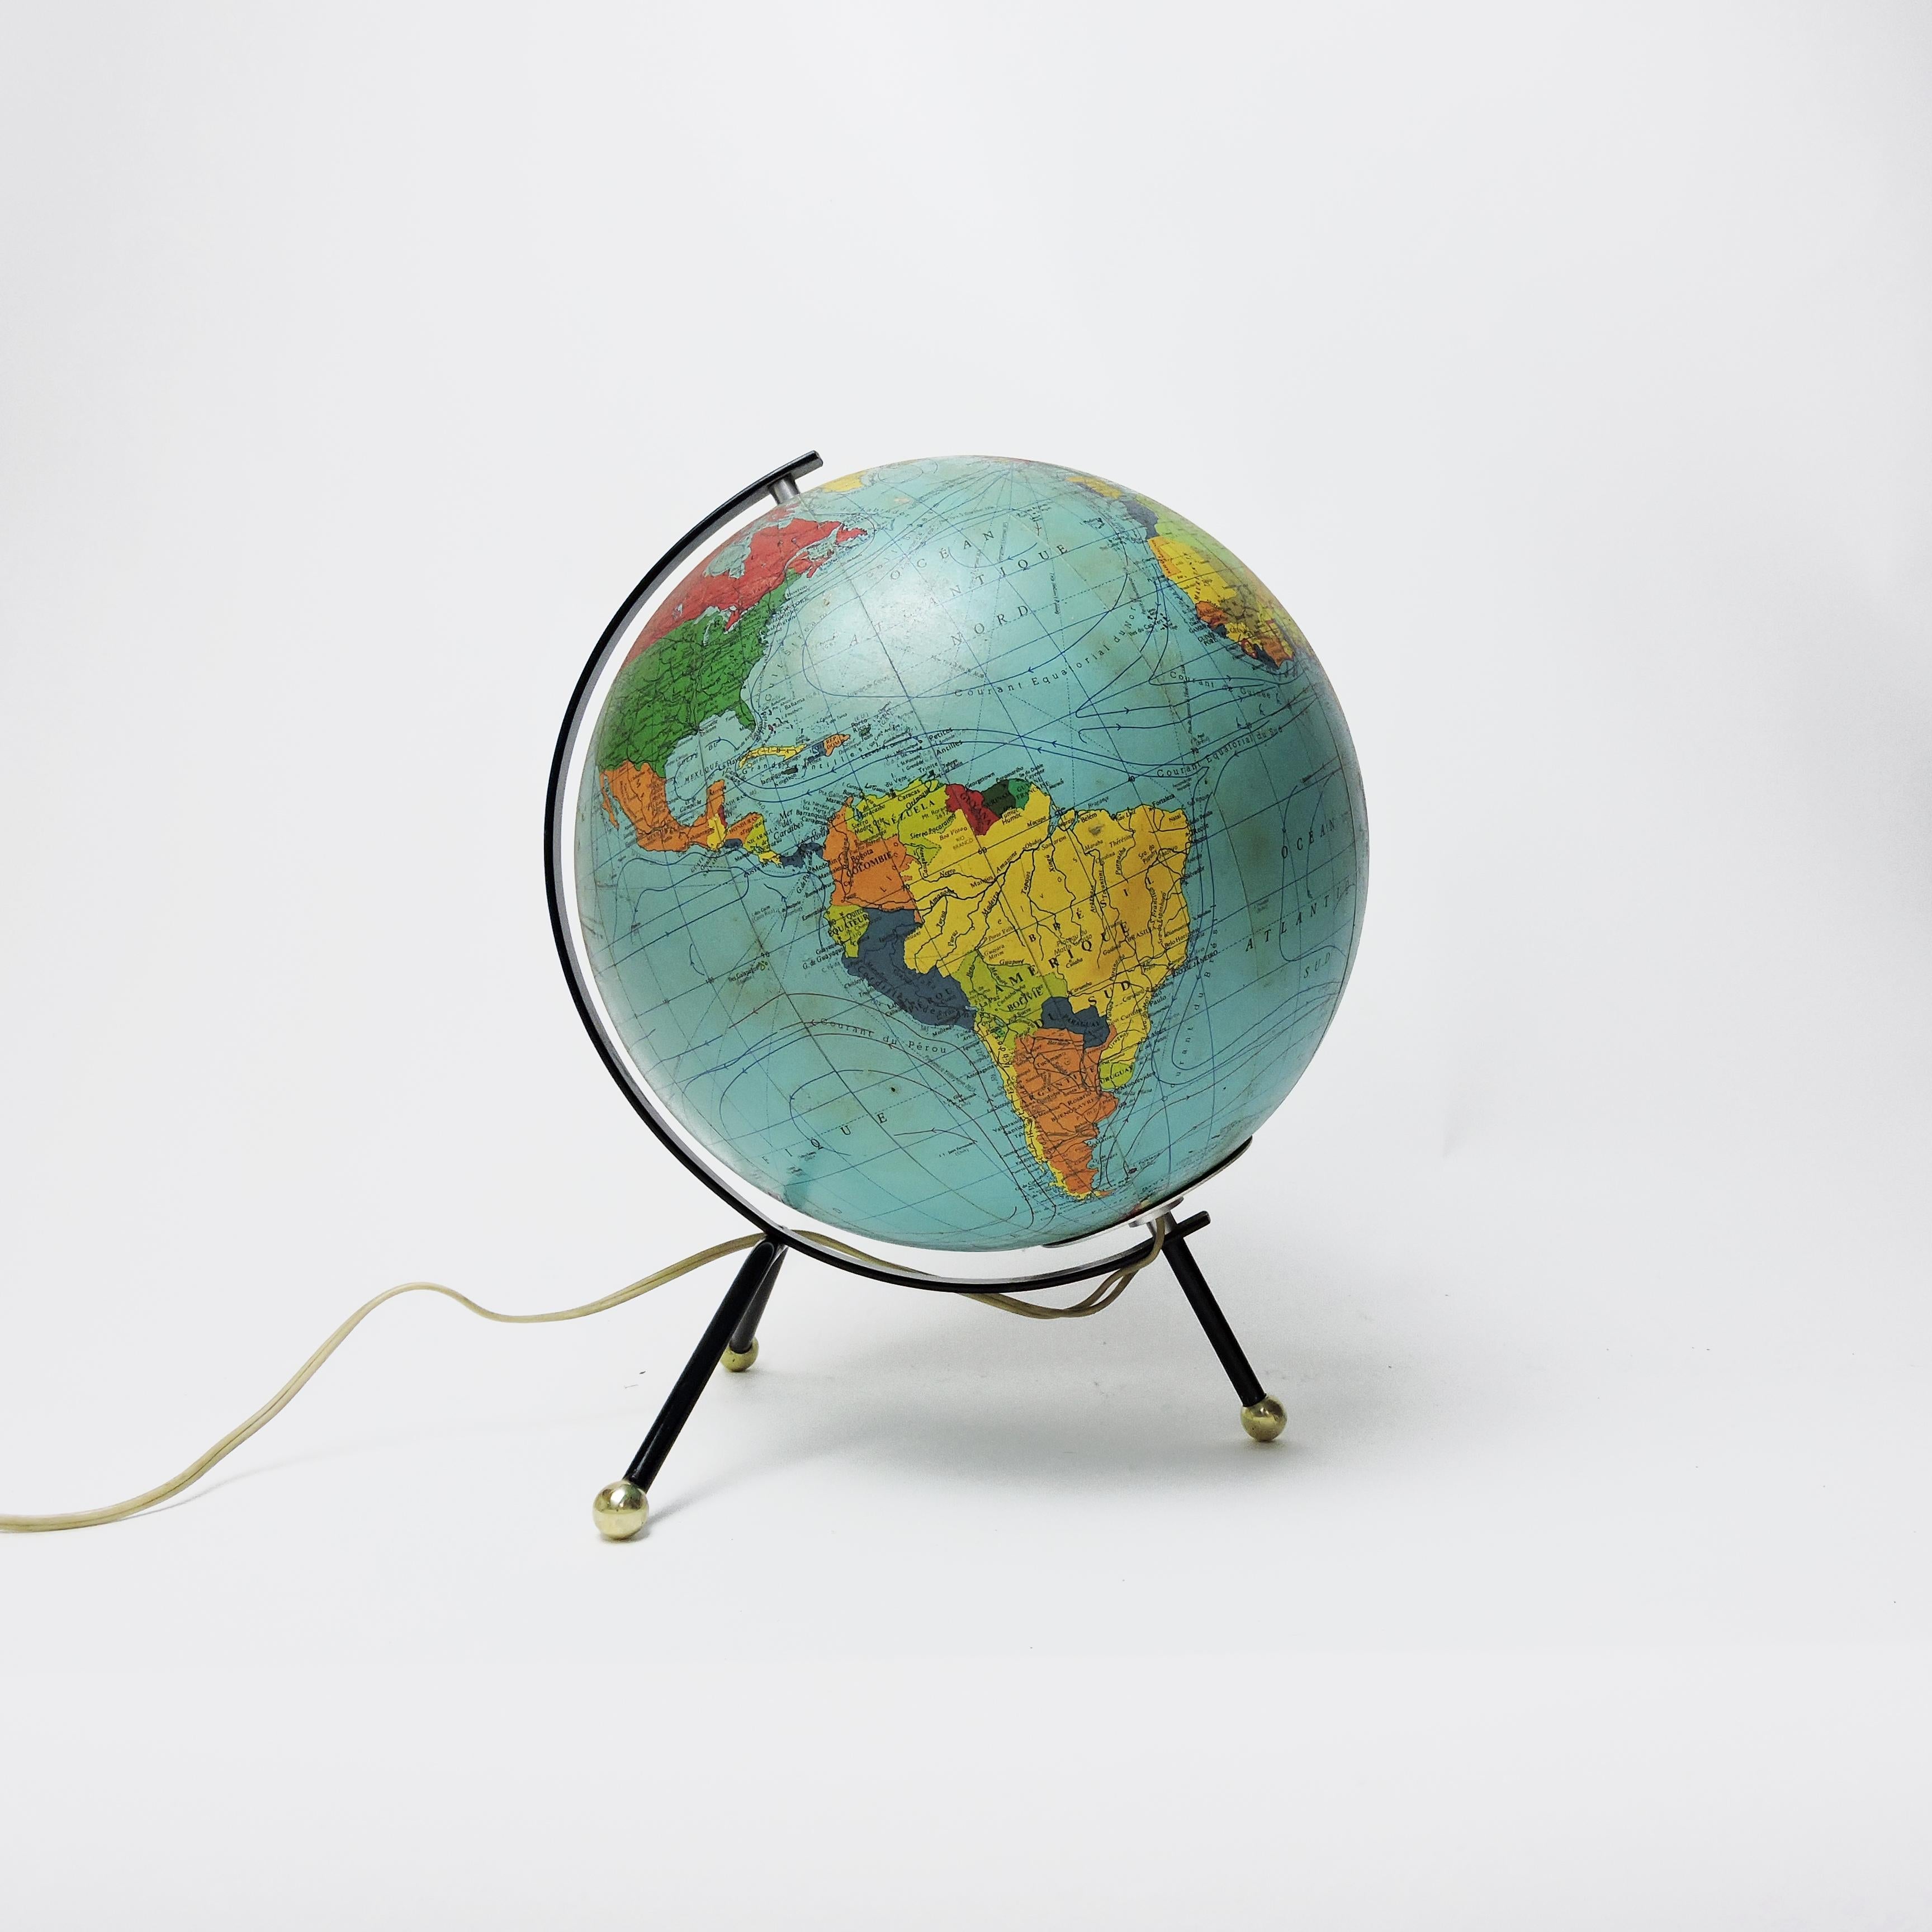 Mid-Century Modern Vintage Tripod Glowing Earth Globe by Cartes Taride, 1966 For Sale